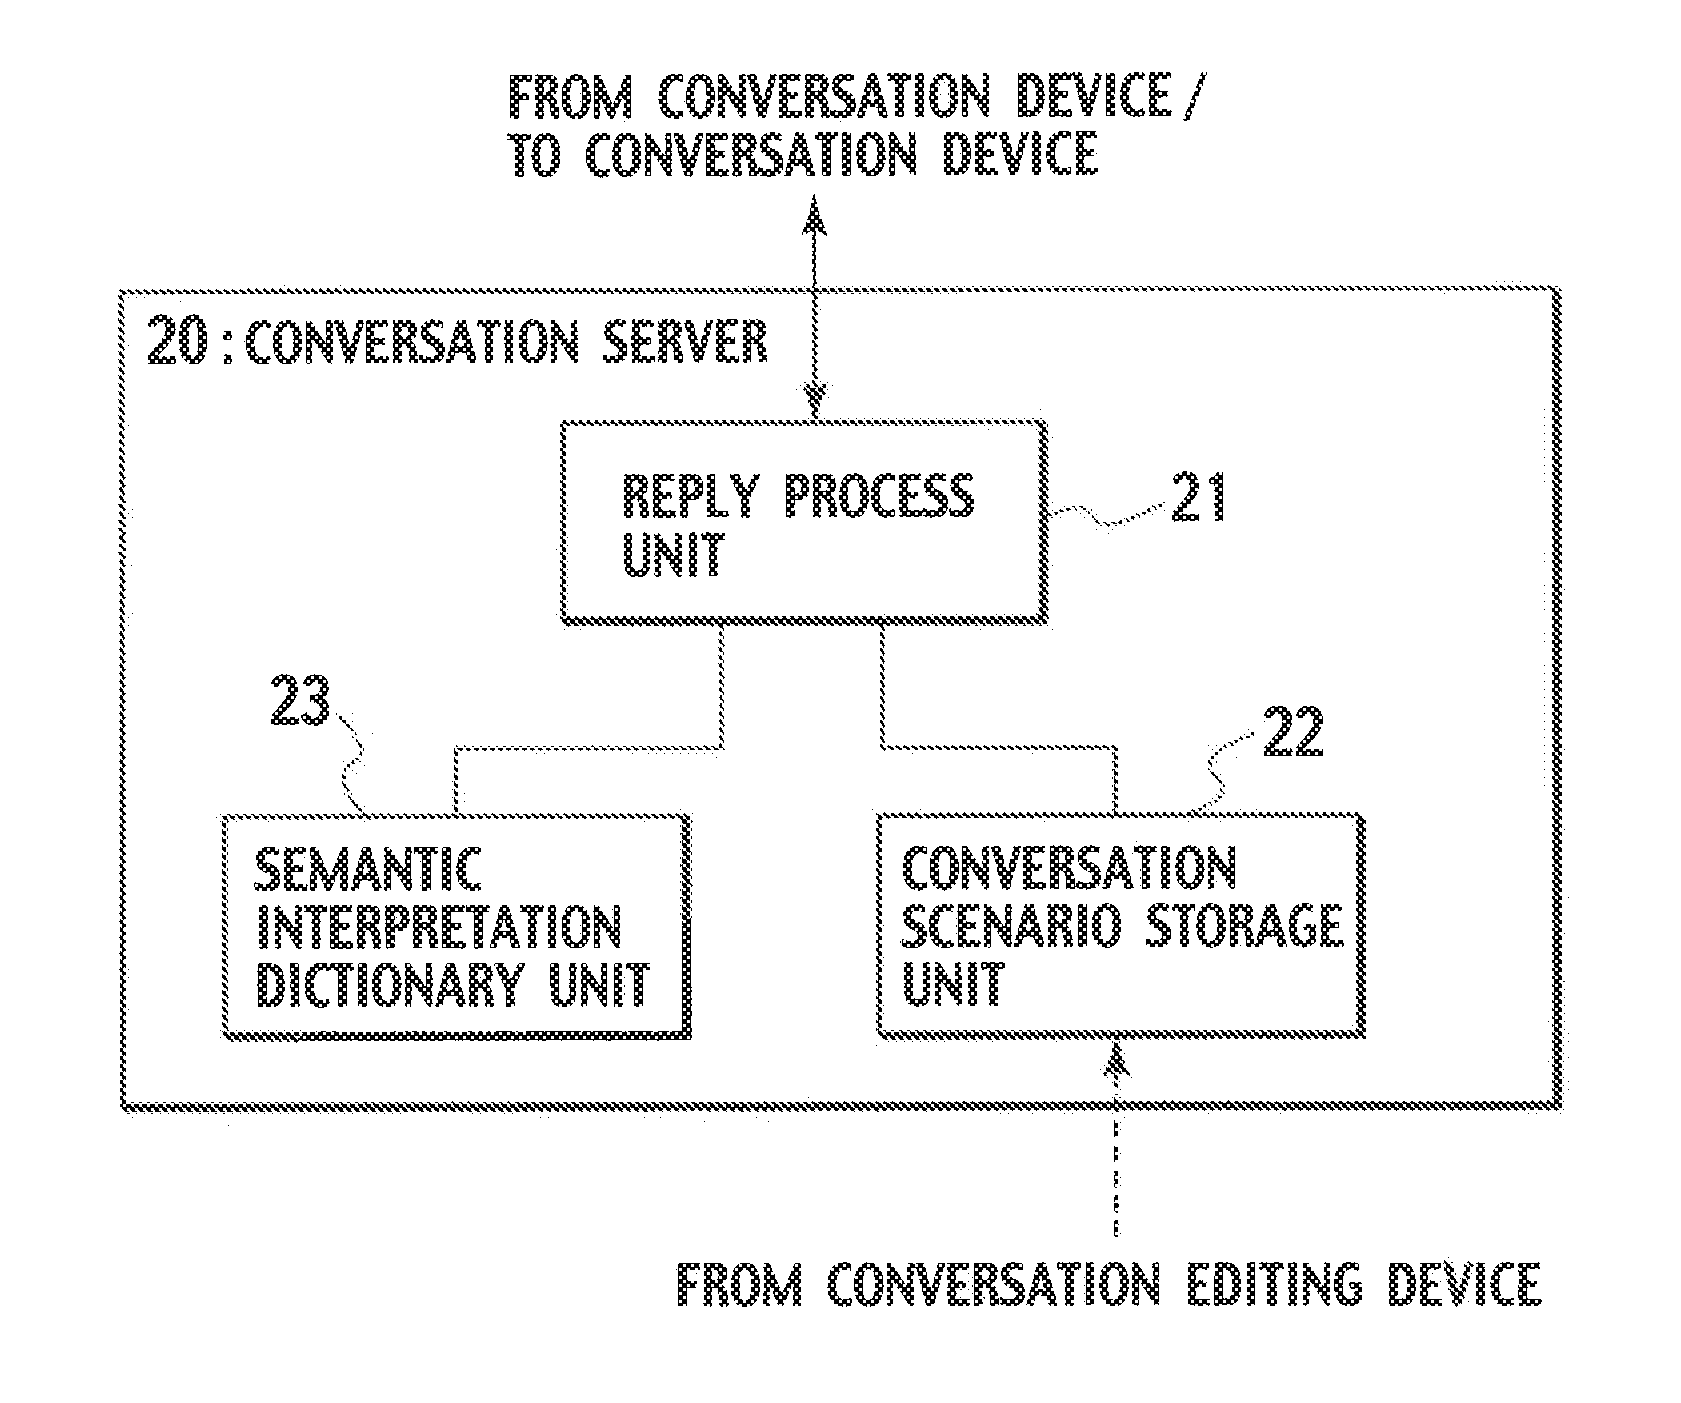 Automatic answering device, automatic answering system, conversation scenario editing device, conversation server, and automatic answering method